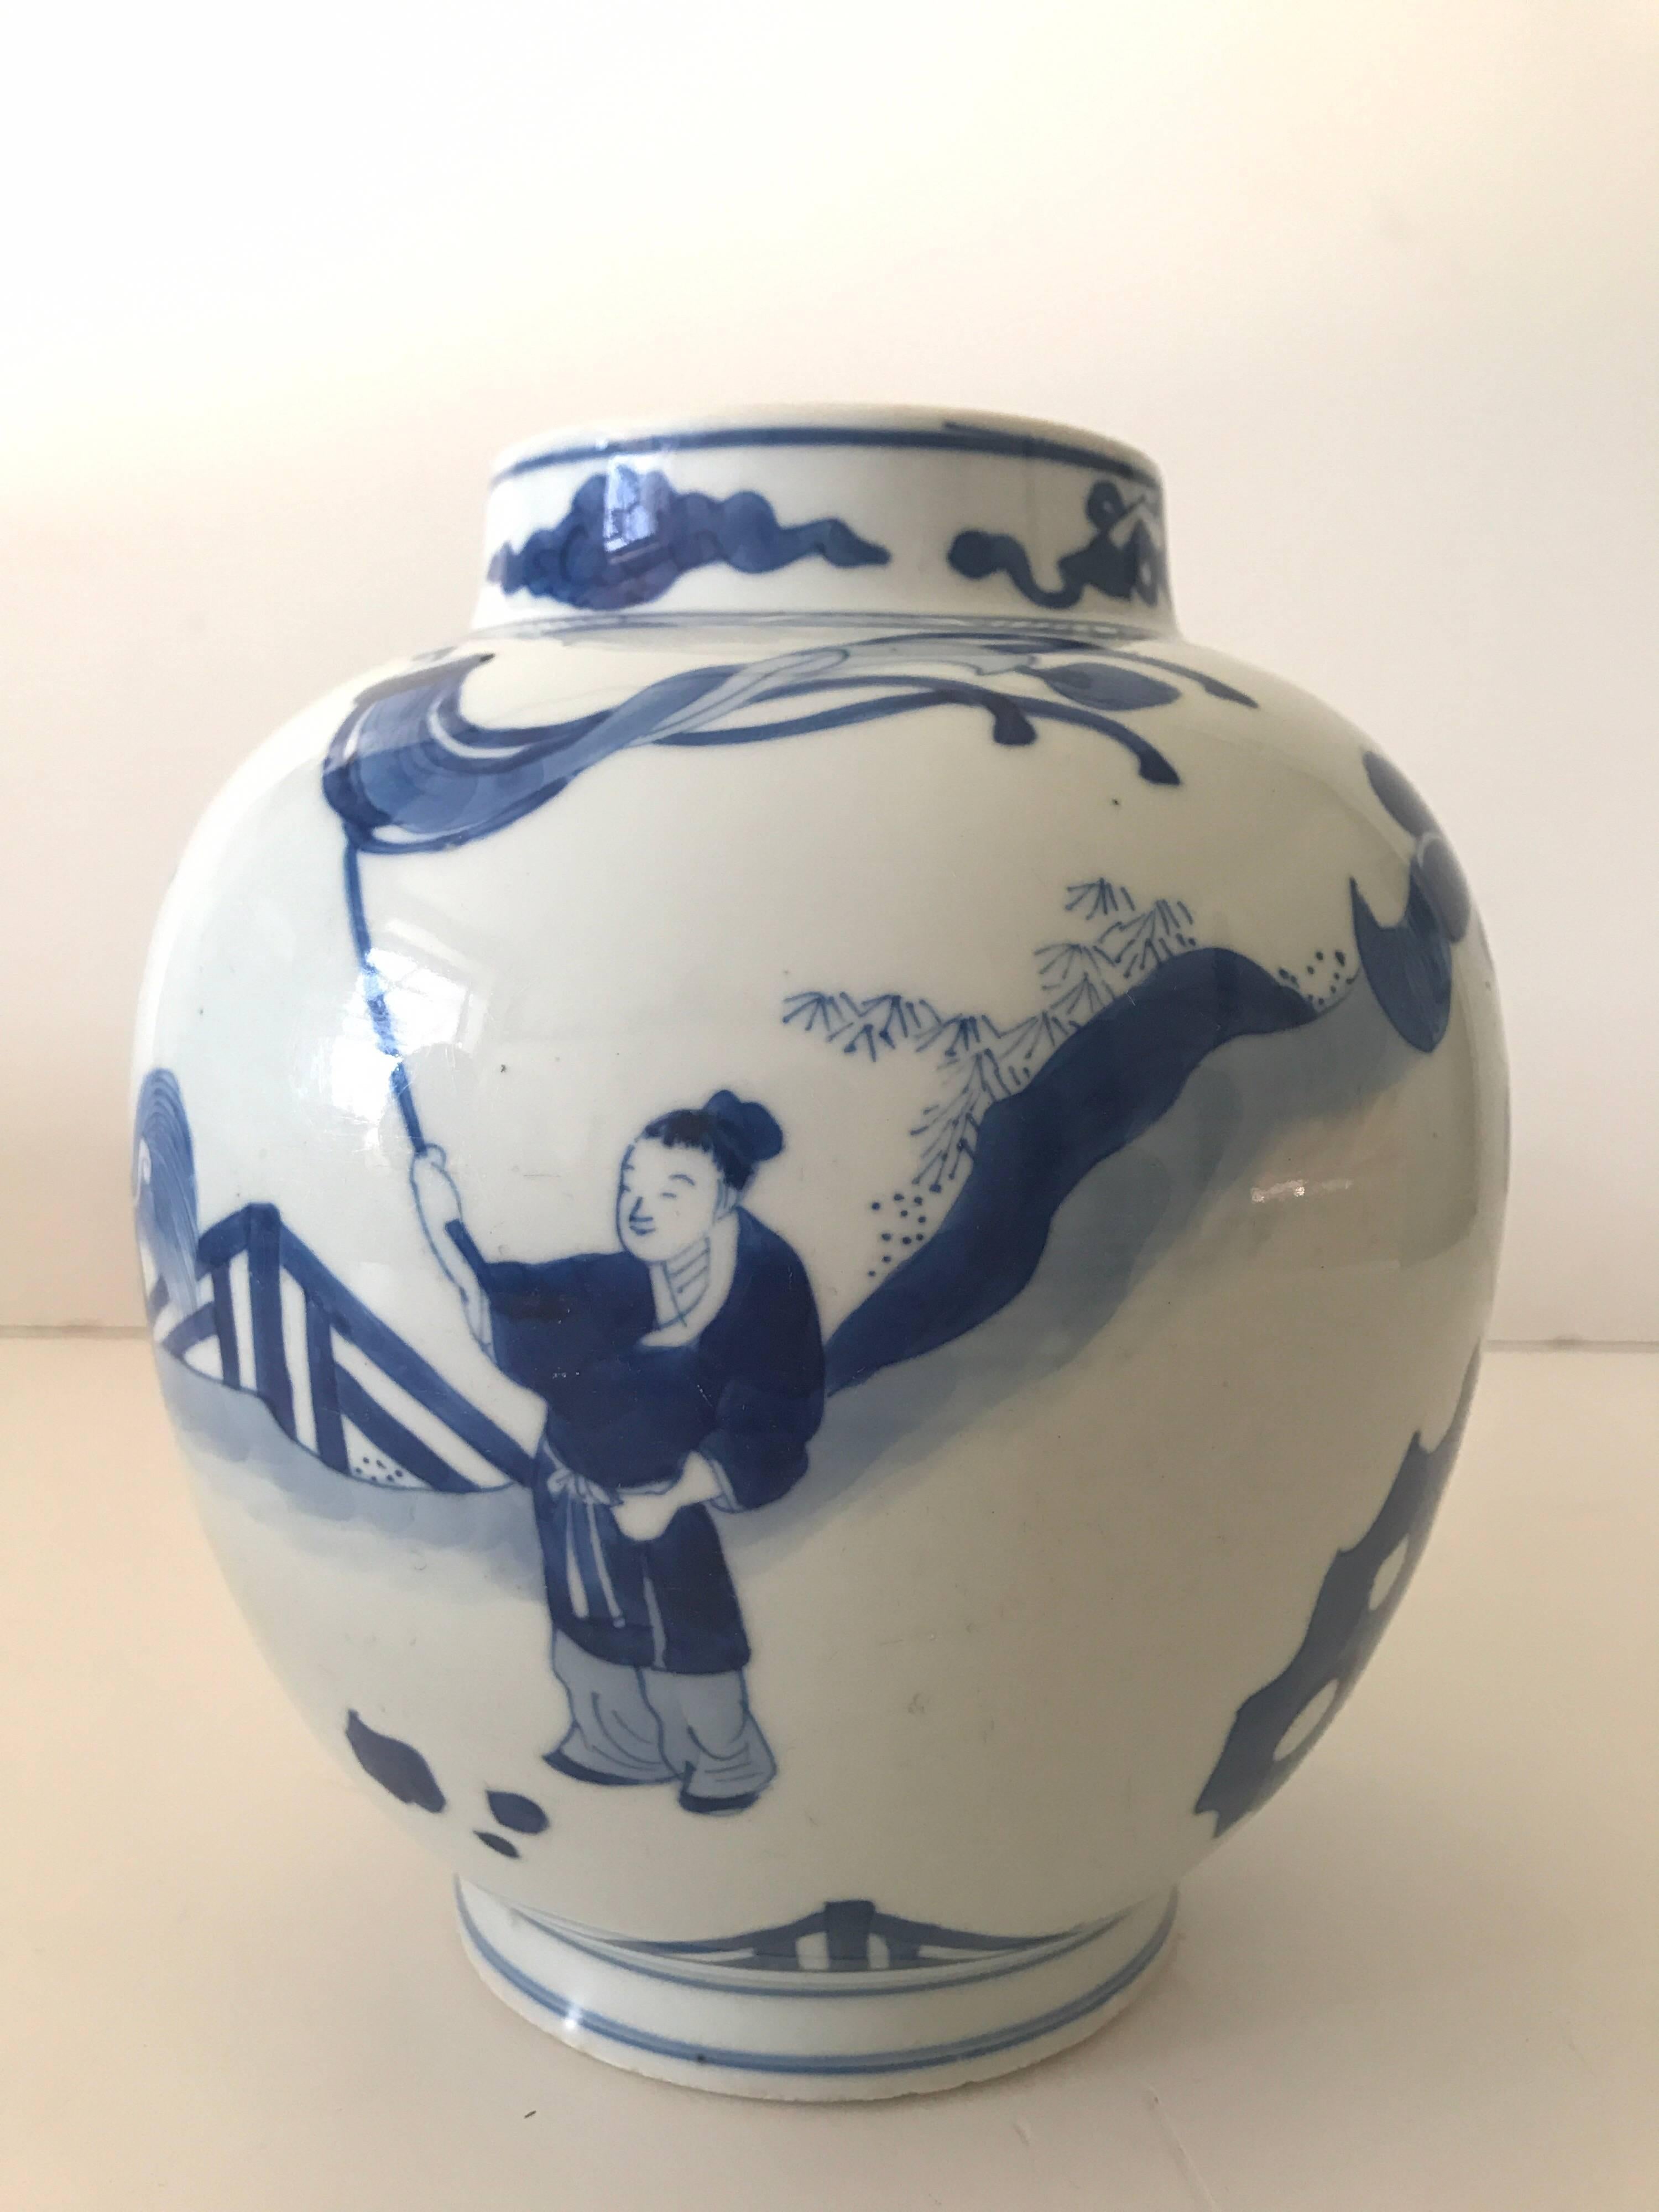 Blue and white Chinese Kangxi period jar.
A very beautiful and rare Kangxi jar depicting a boy riding a Qilin in a garden with two other boys waving flags on each side. This jar has a very good provenance from the well known Swedish art and antique